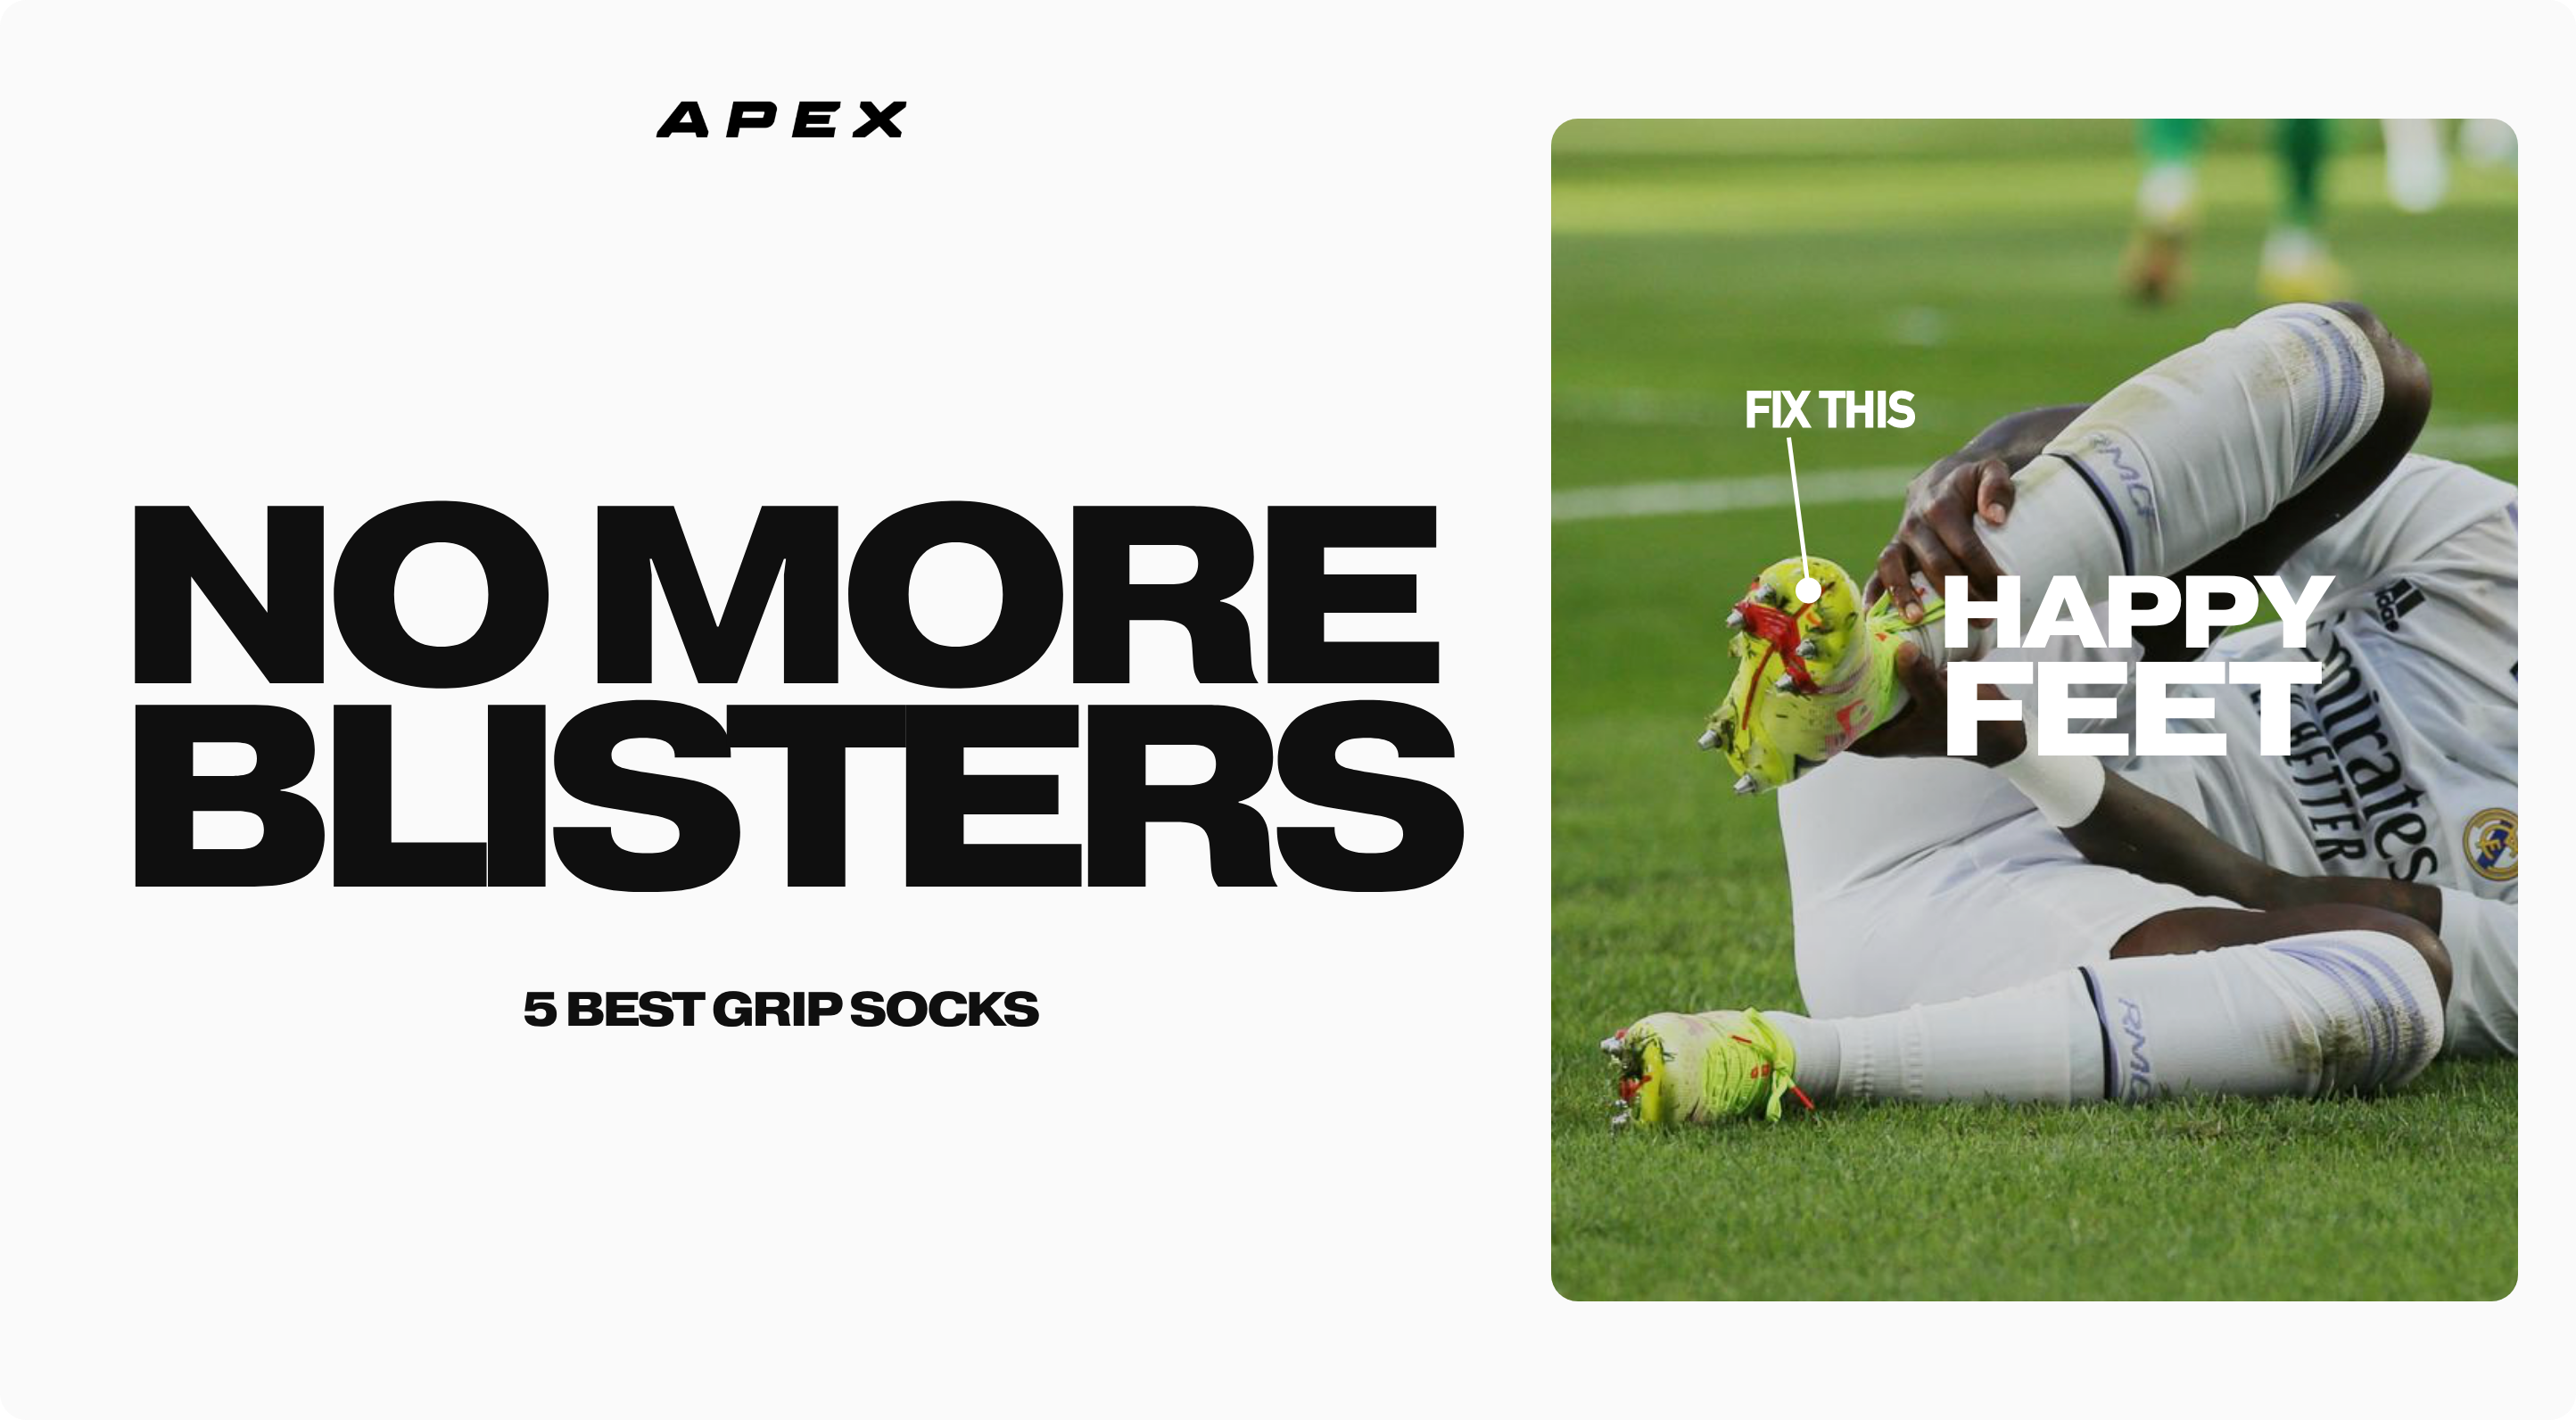 Why Should Players Use Grip Socks? Do They Make a Difference?